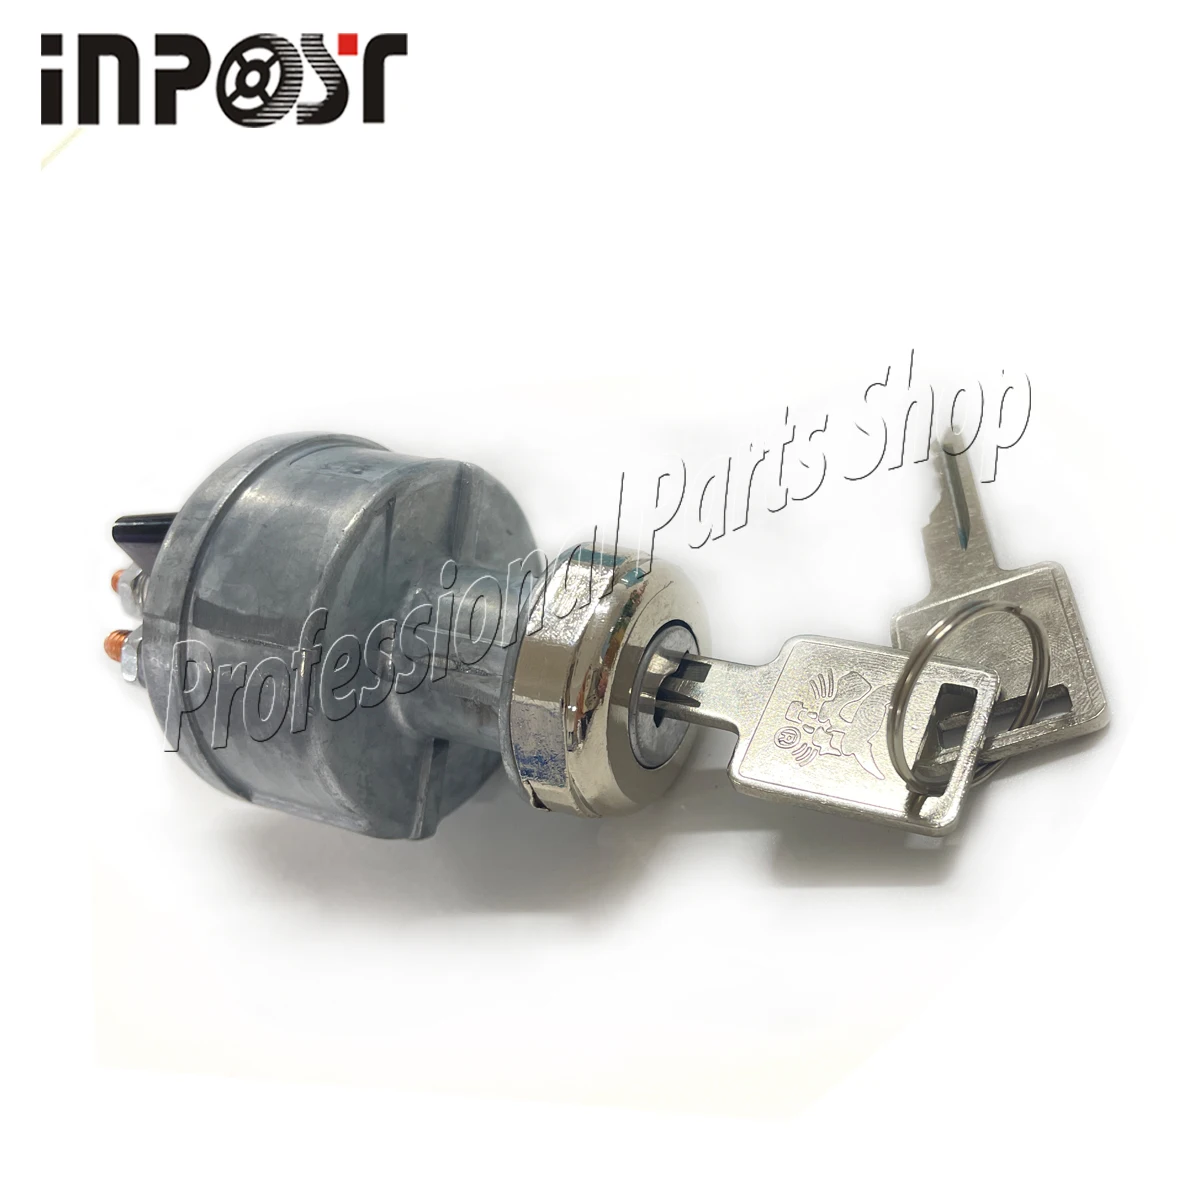 

Ignition Switch with 2 Keys 6665606 for Bobcat Loaders 641, 642, 643, 645, 653, 730, 731, 732, 741, 742, 743, 751, 753, 763, 773